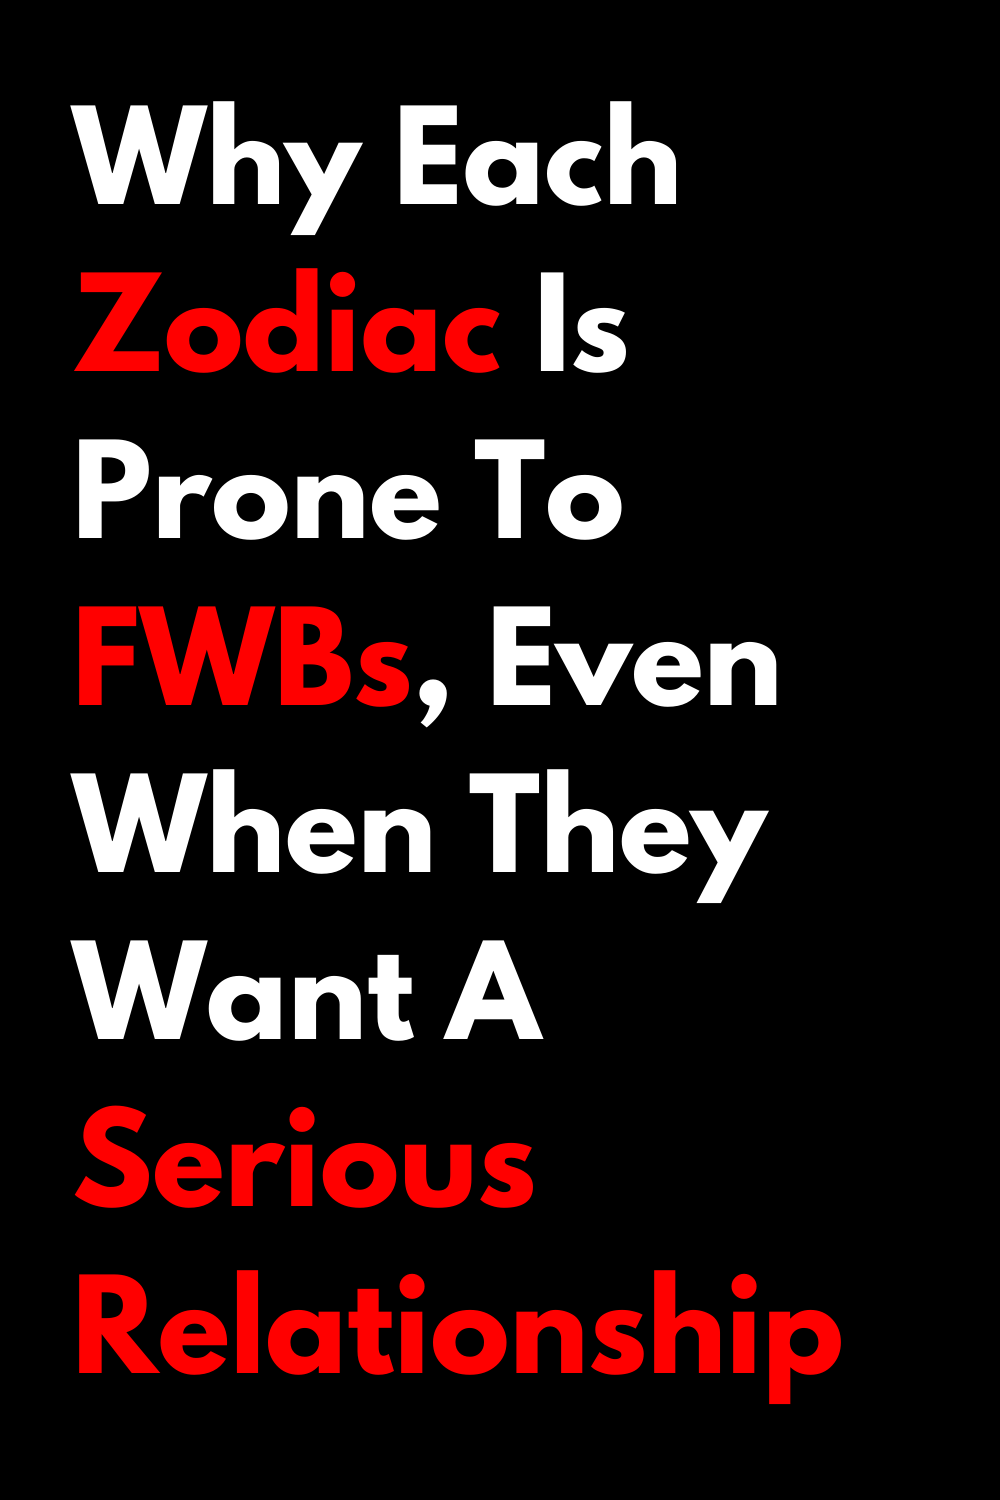 Why Each Zodiac Is Prone To FWBs, Even When They Want A Serious Relationship